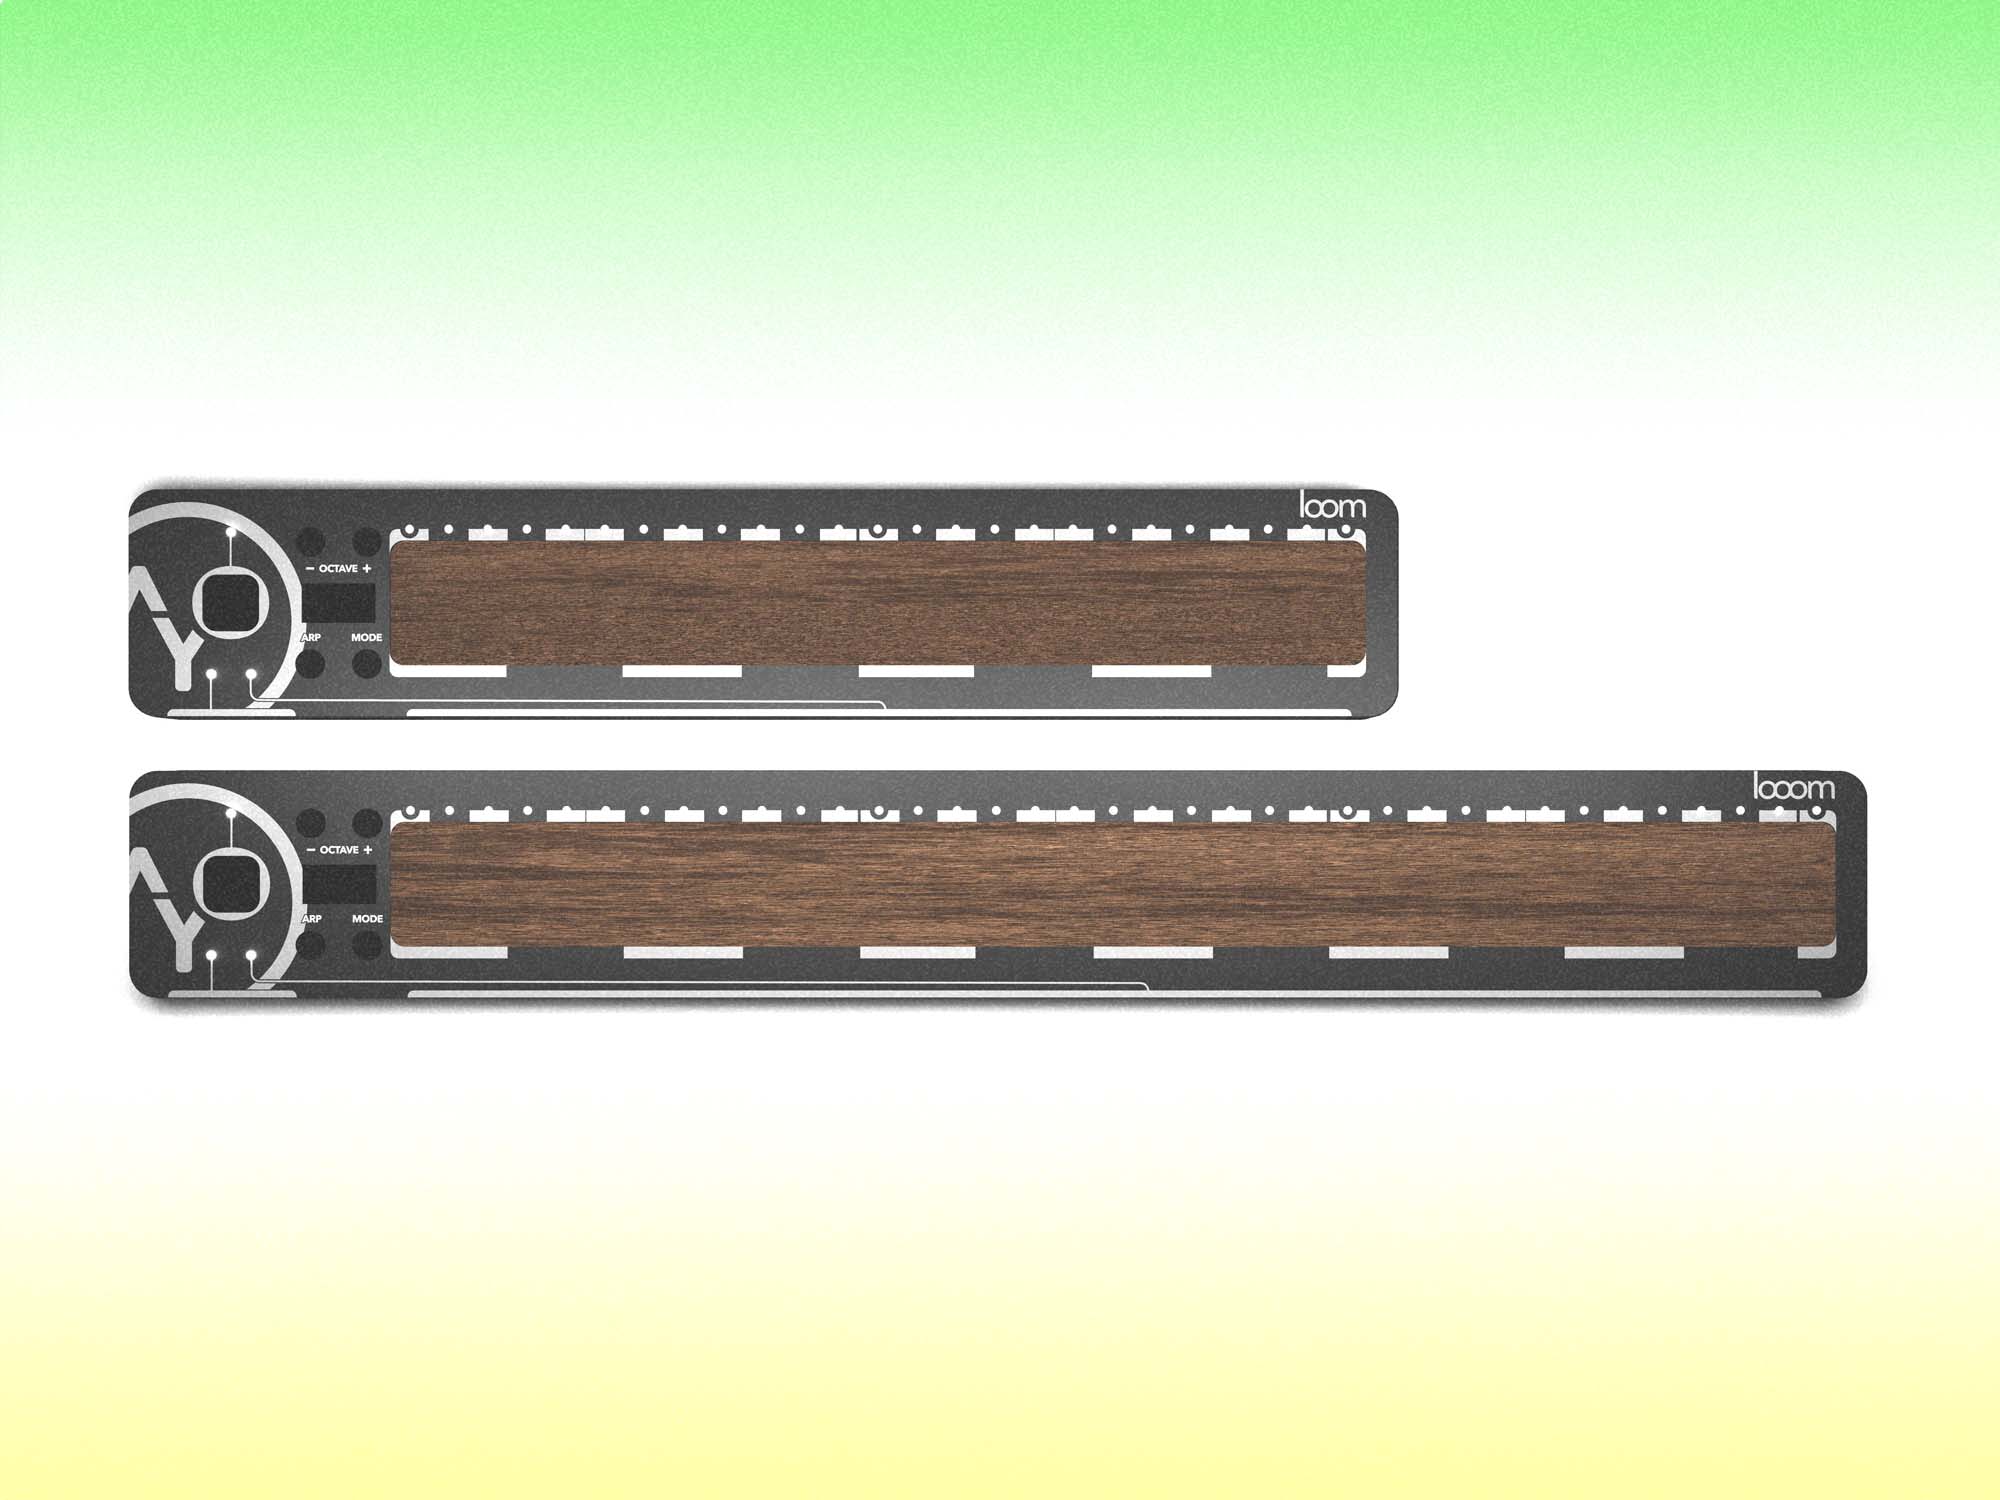 Loom two-octave and three-octave versions. They show a wooden touch surface and a black enclosure around it.